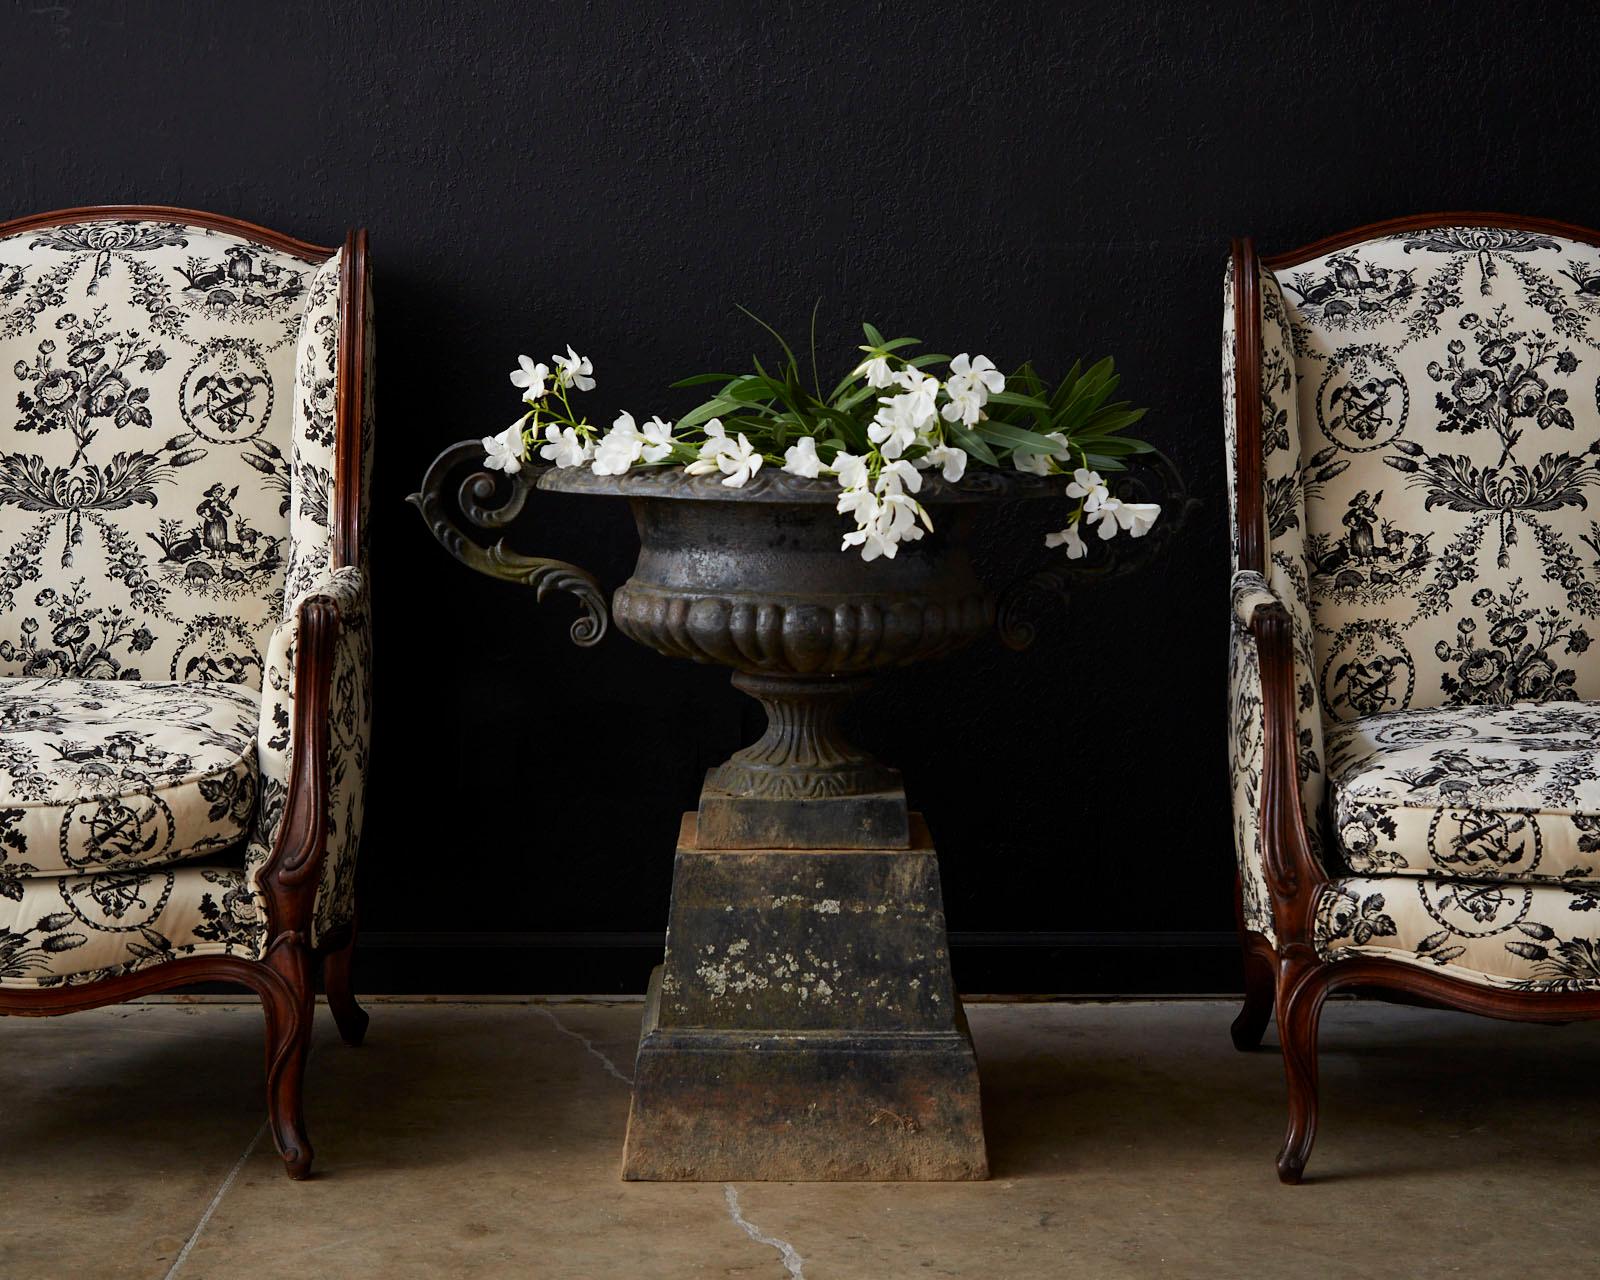 Stunning pair of 19th century French wing chairs featuring a dramatic black and white toile de jouy upholstery. Made in the Classic French Louis XV taste with carved walnut frames. The chair have large fully developed wings and a molded frame with a